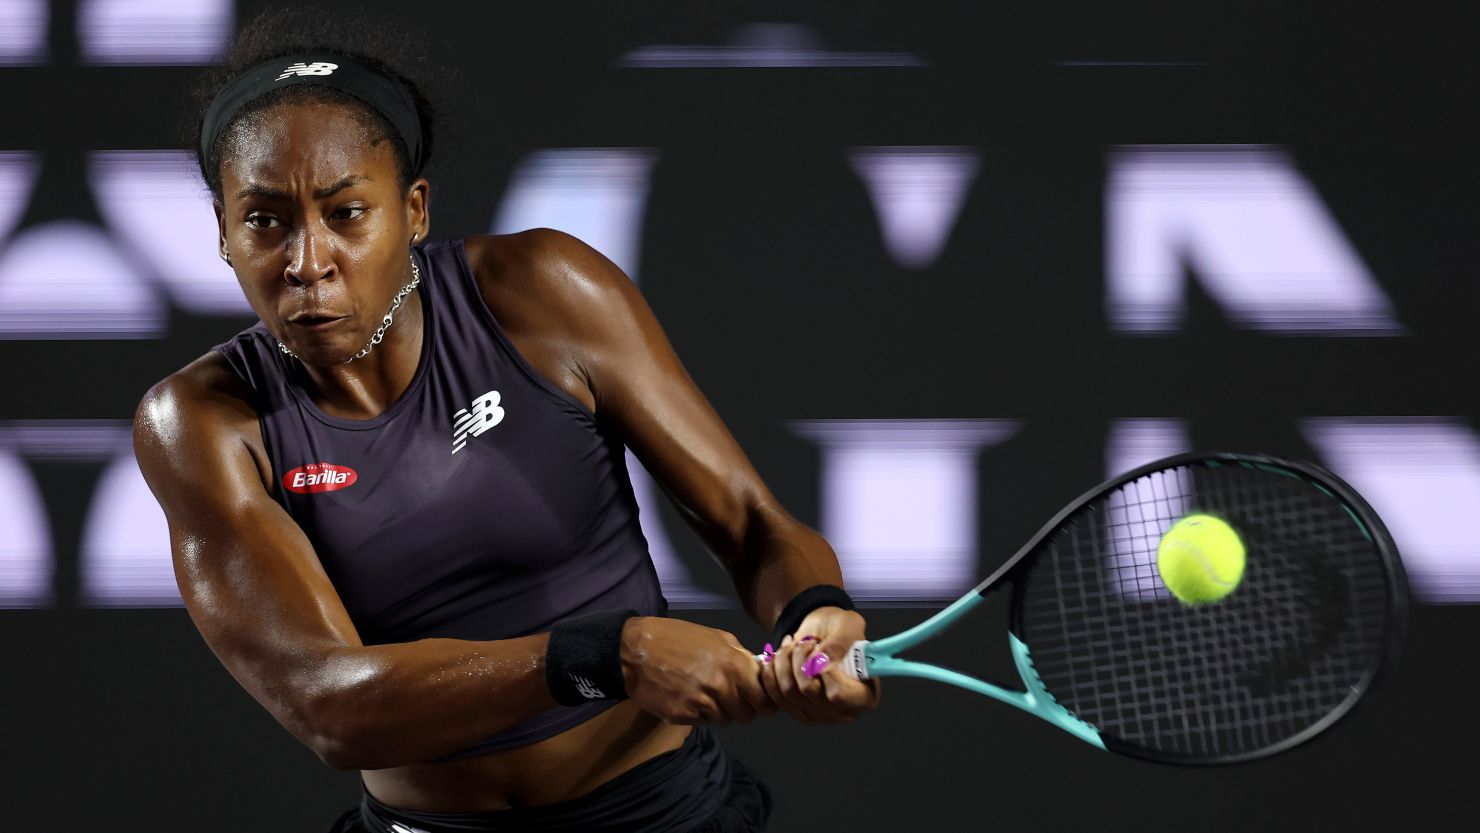 CANCUN, MEXICO - NOVEMBER 04: Coco Gauff of United States returns a shot to Jessica Pegula of United States in their Women's Singles Semifinal match during day 7 of the GNP Seguros WTA Finals Cancun 2023 part of the Hologic WTA Tour on November 04, 2023 in Cancun, Mexico. (Photo by Clive Brunskill/Getty Images)